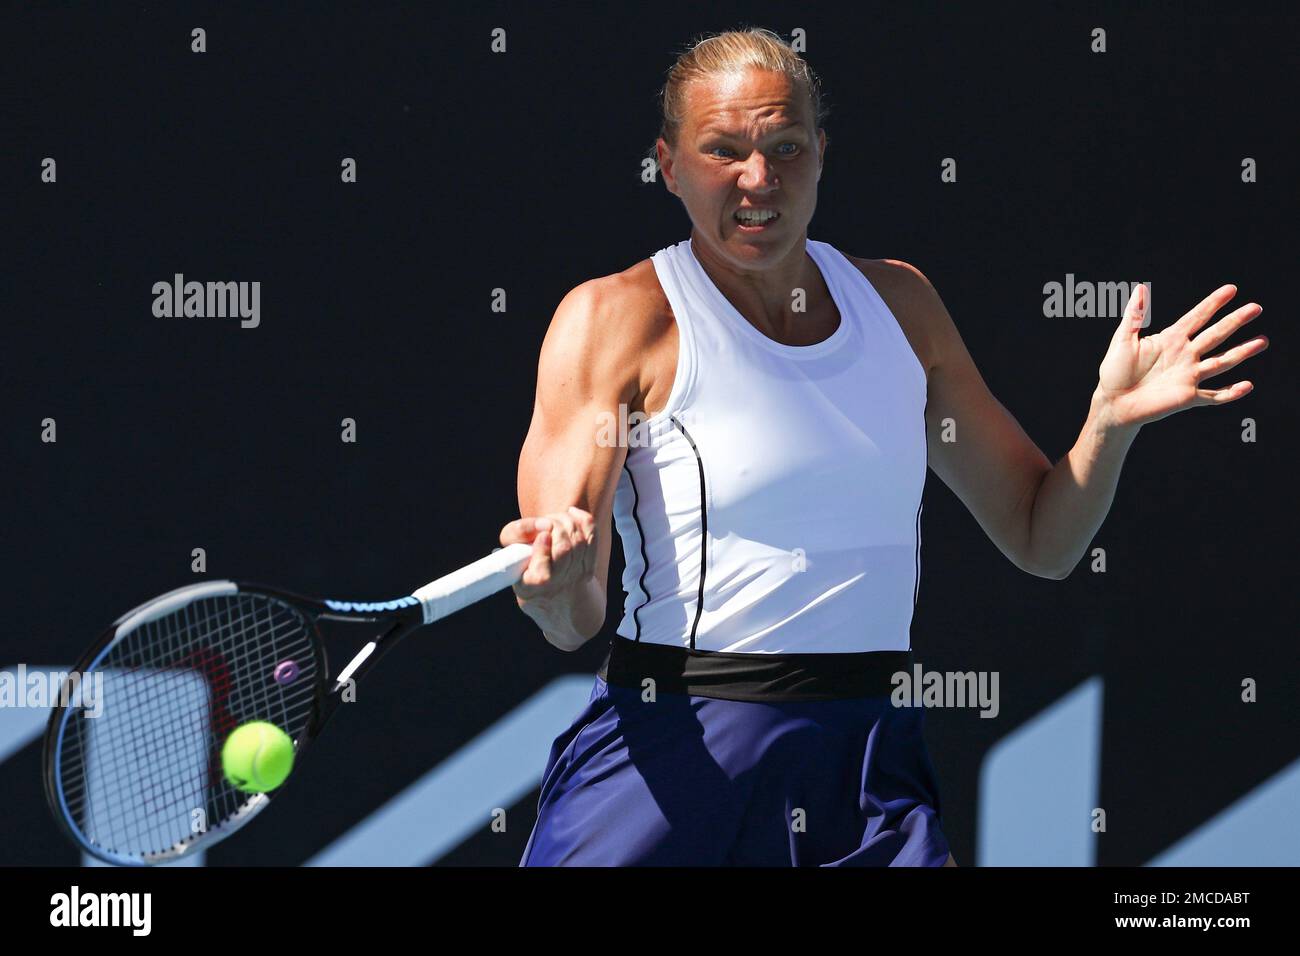 Kaia Kanepi of Estonia plays a forehand return to Marie Bouzkova of the Czech Republic during their second round match at the Australian Open tennis championships in Melbourne, Australia, Thursday, Jan